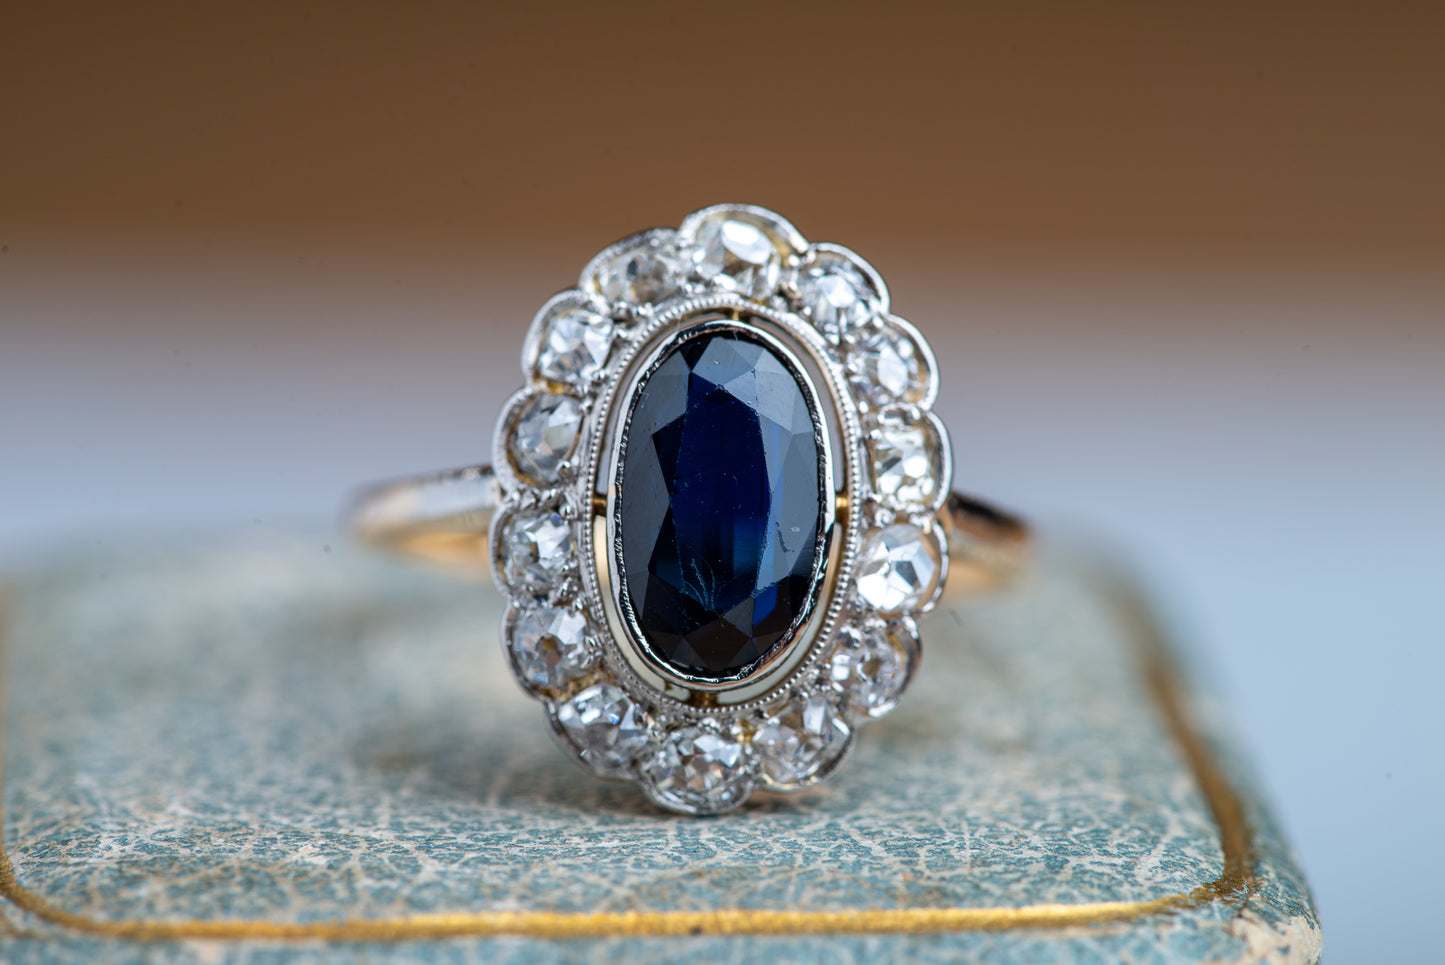 Antique 1900's French Sapphire Diamond Diana Ring in 18K Gold